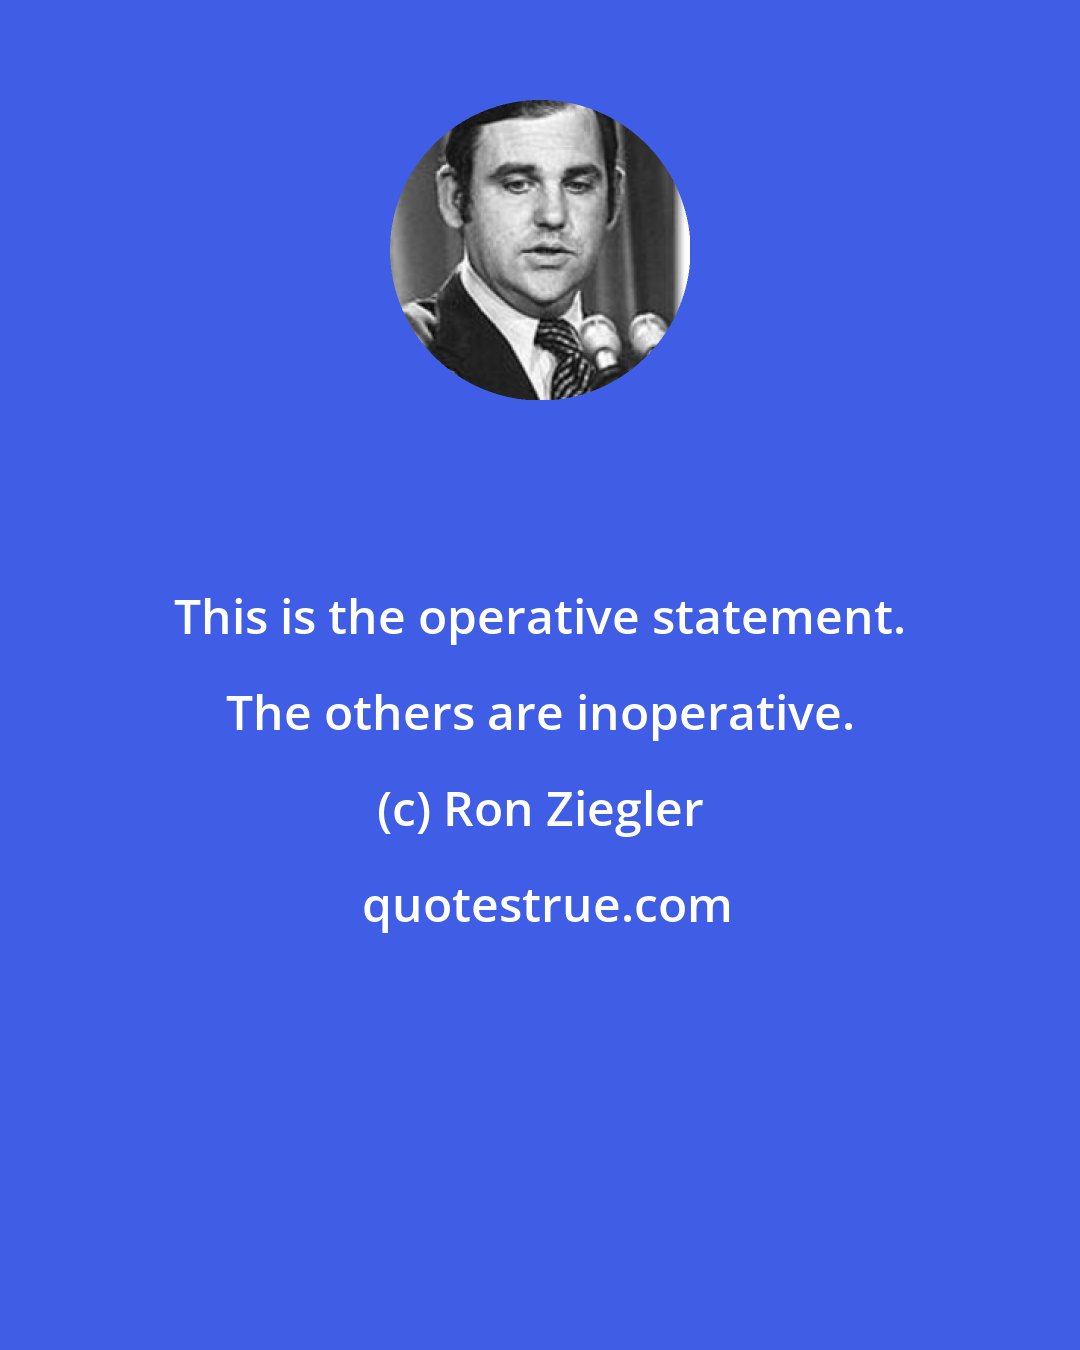 Ron Ziegler: This is the operative statement. The others are inoperative.